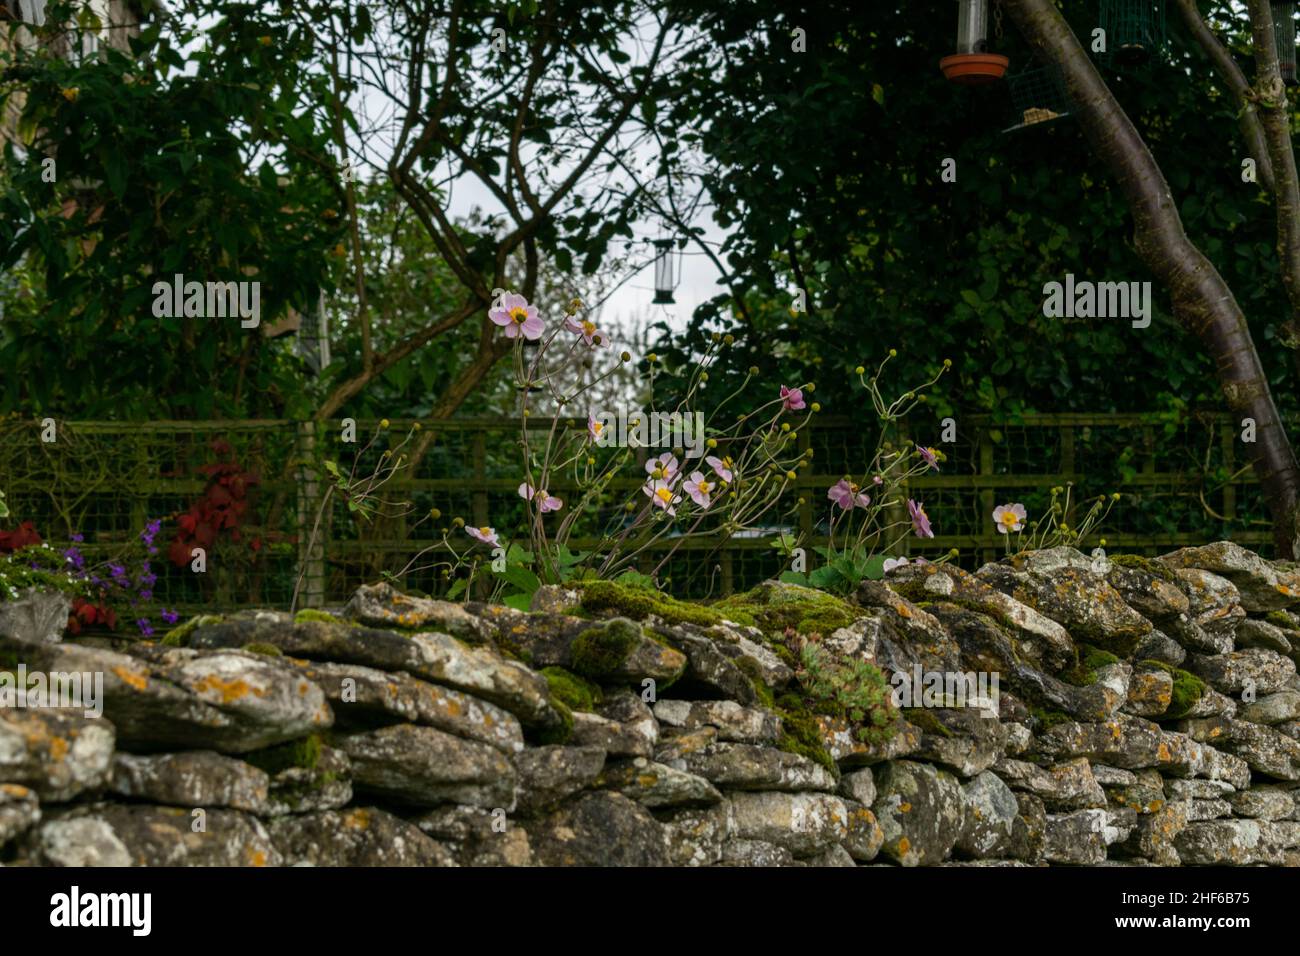 Stone clad wall, quaint and covered with moss with flowering flowers growing on top. Picturesque postcard scene of beautiful English countryside. Coun Stock Photo